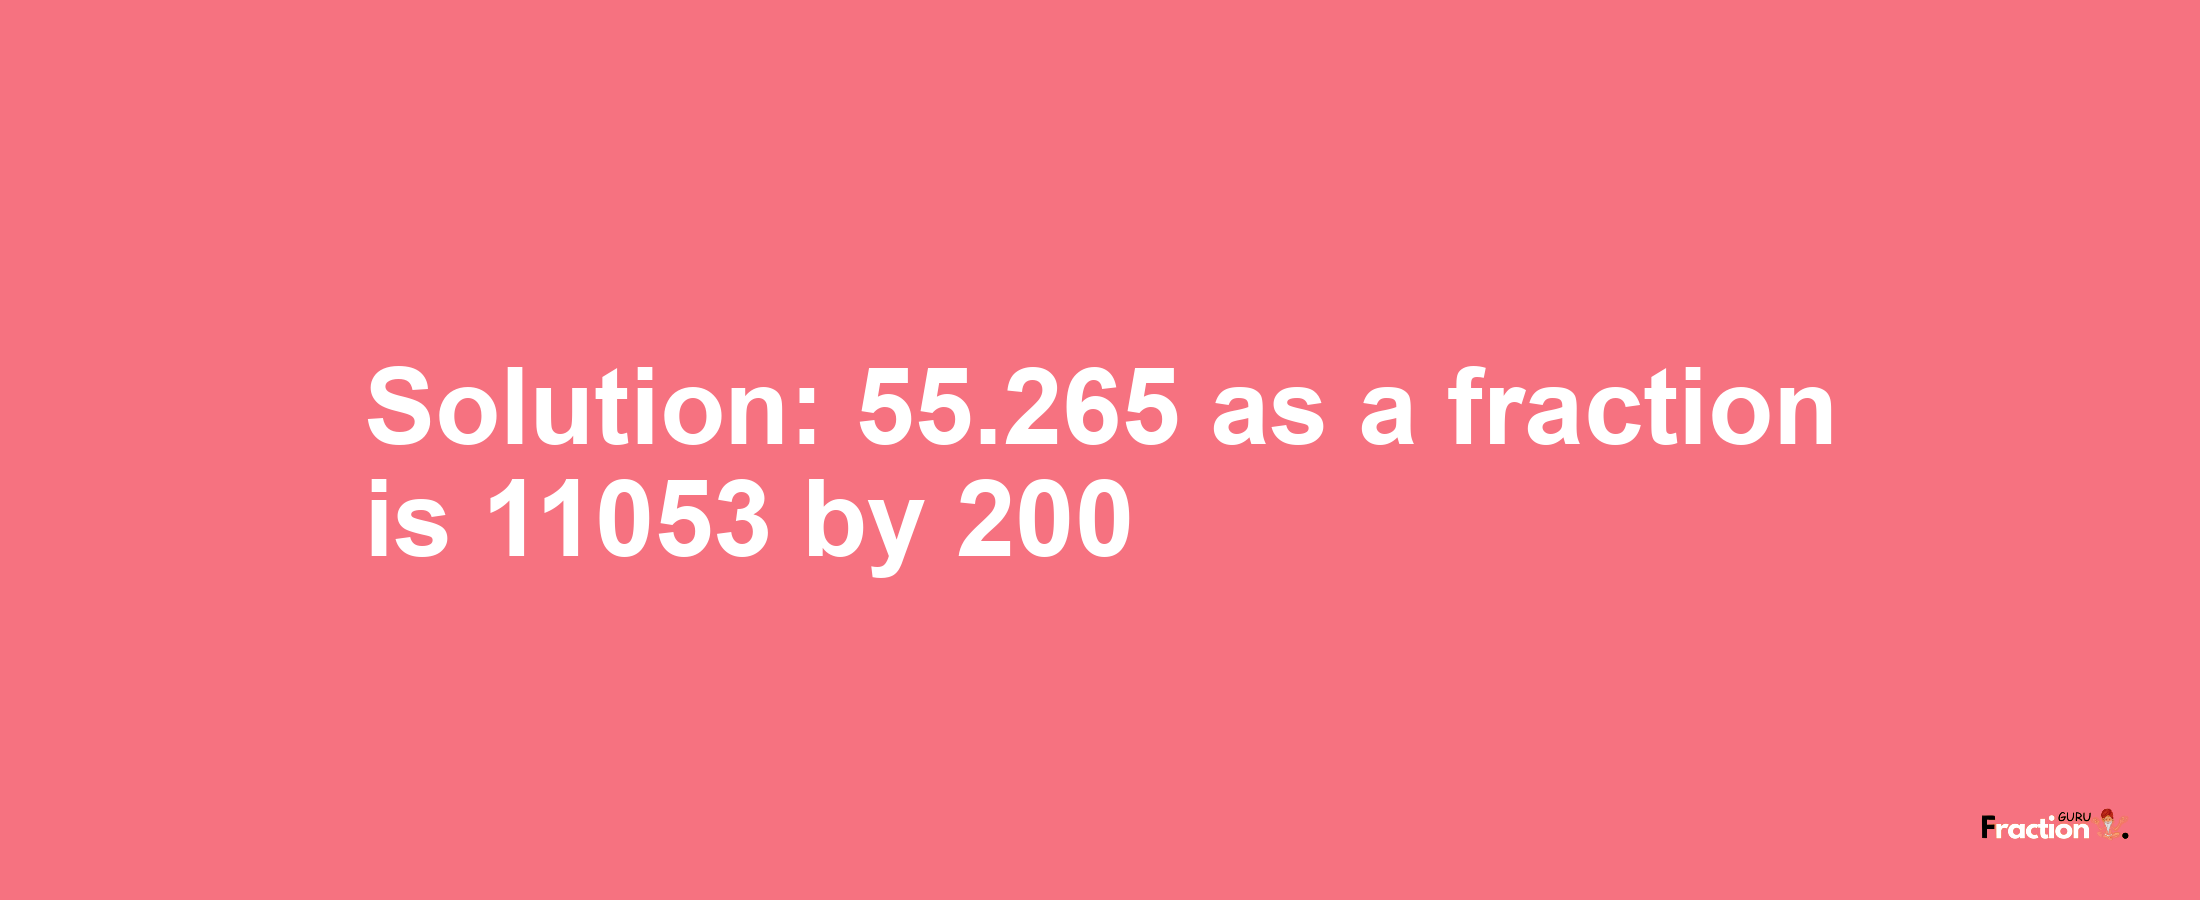 Solution:55.265 as a fraction is 11053/200